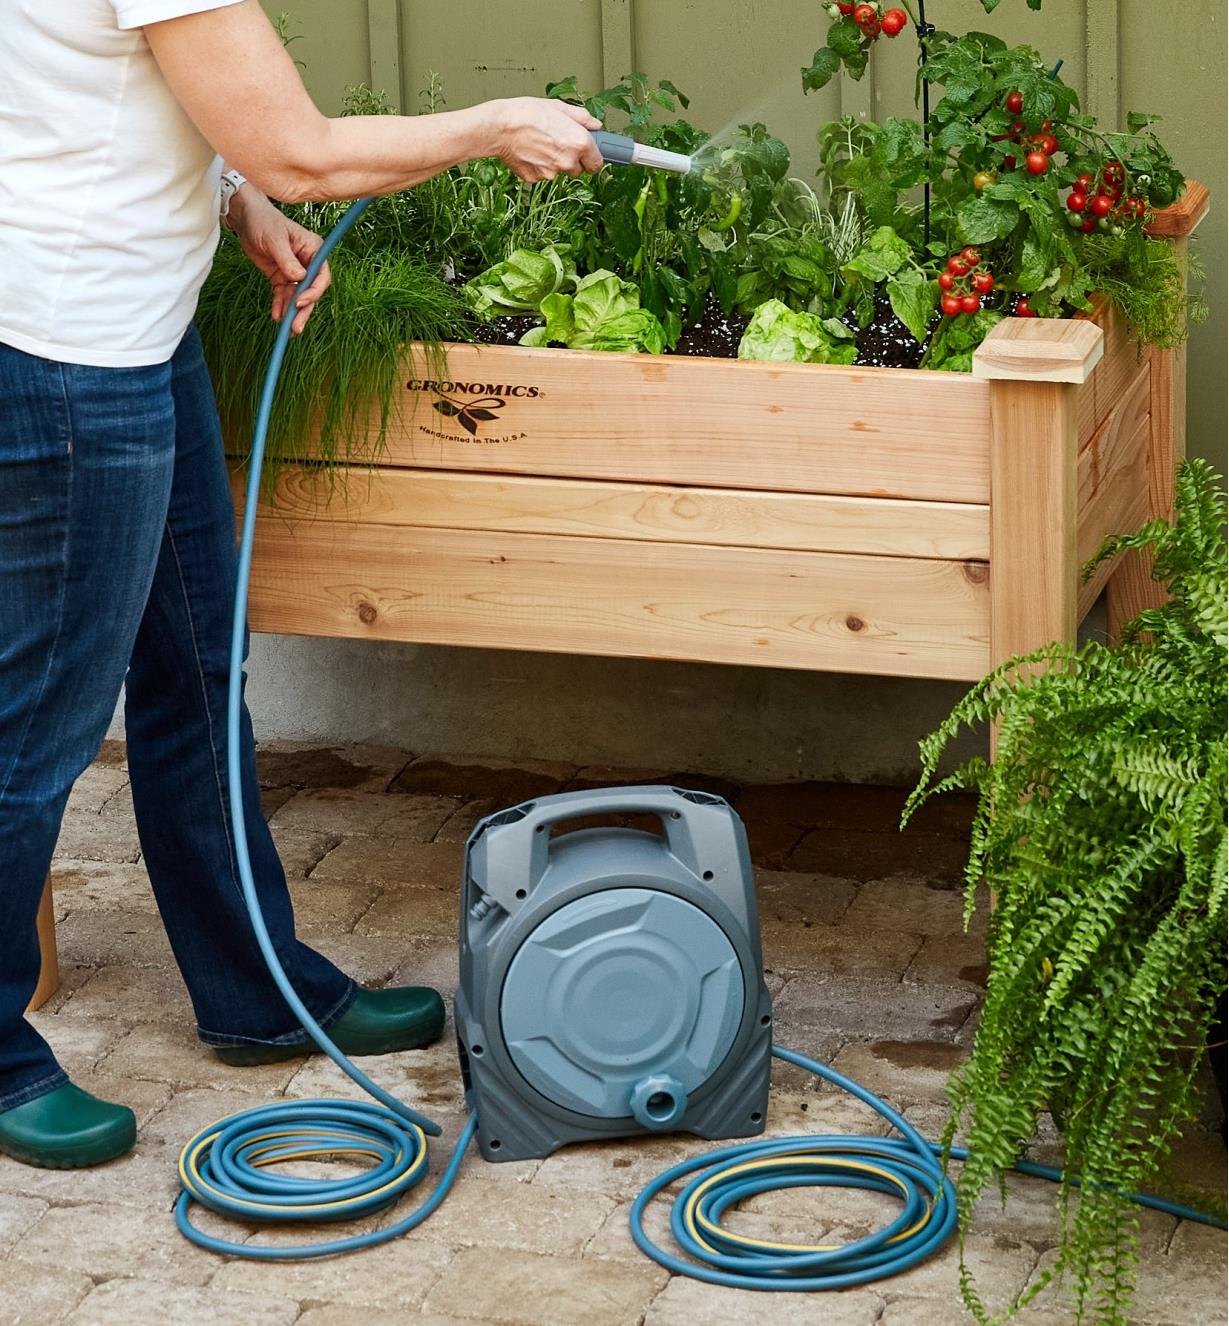 27 Best Landscaping Ideas To Hide Utility Boxes  Garden hose reel, Garden  boxes diy, Garden boxes